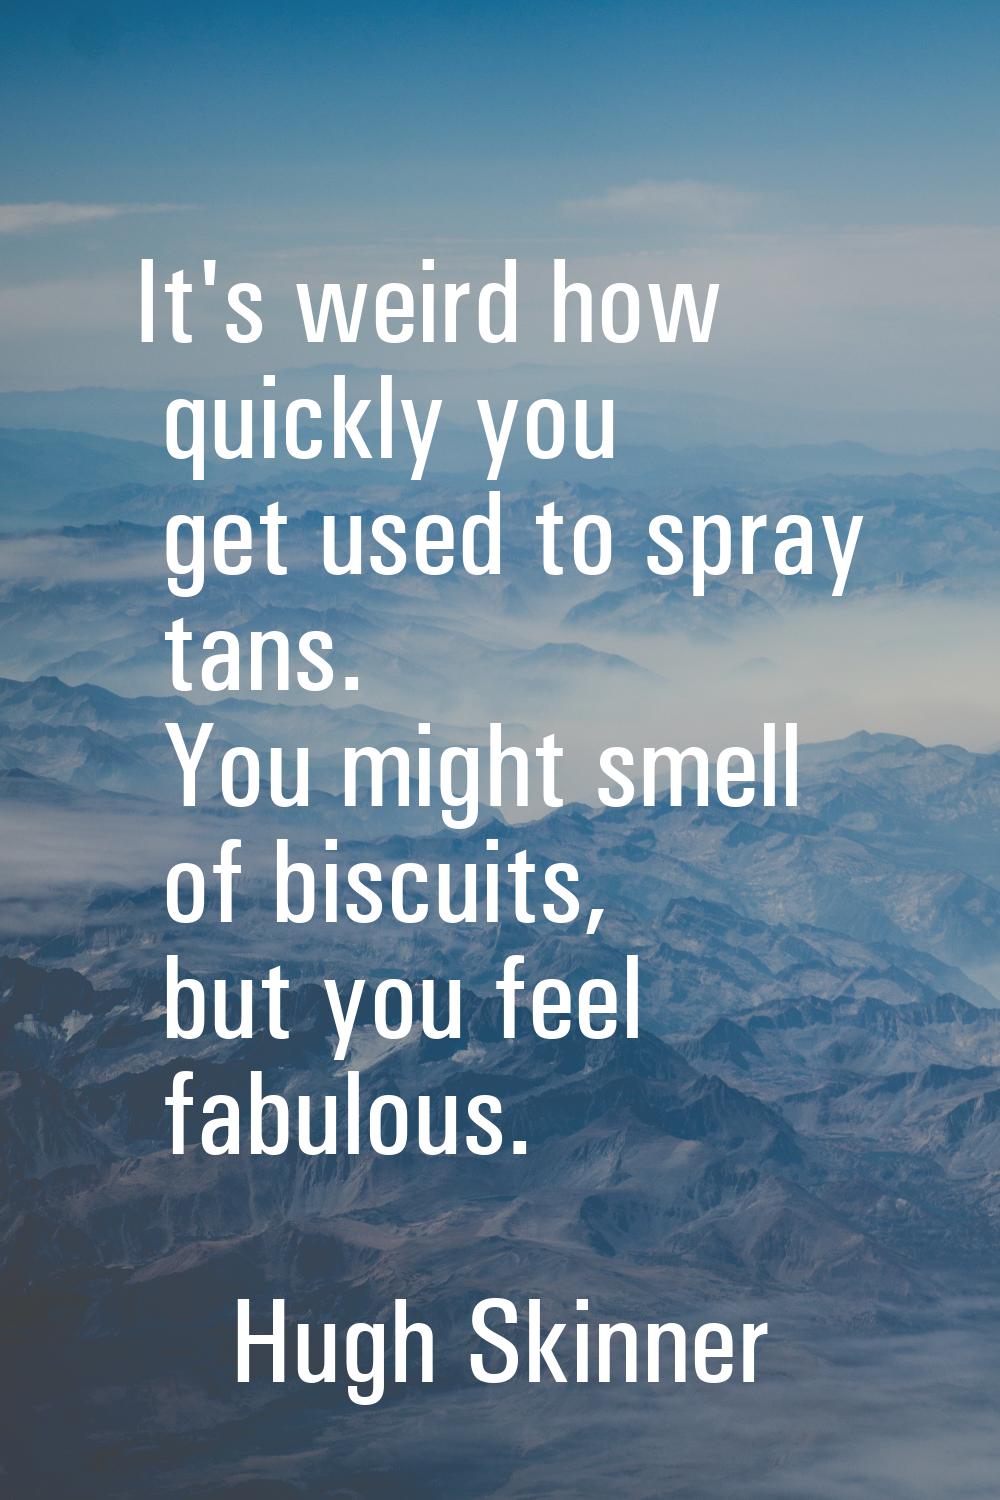 It's weird how quickly you get used to spray tans. You might smell of biscuits, but you feel fabulo